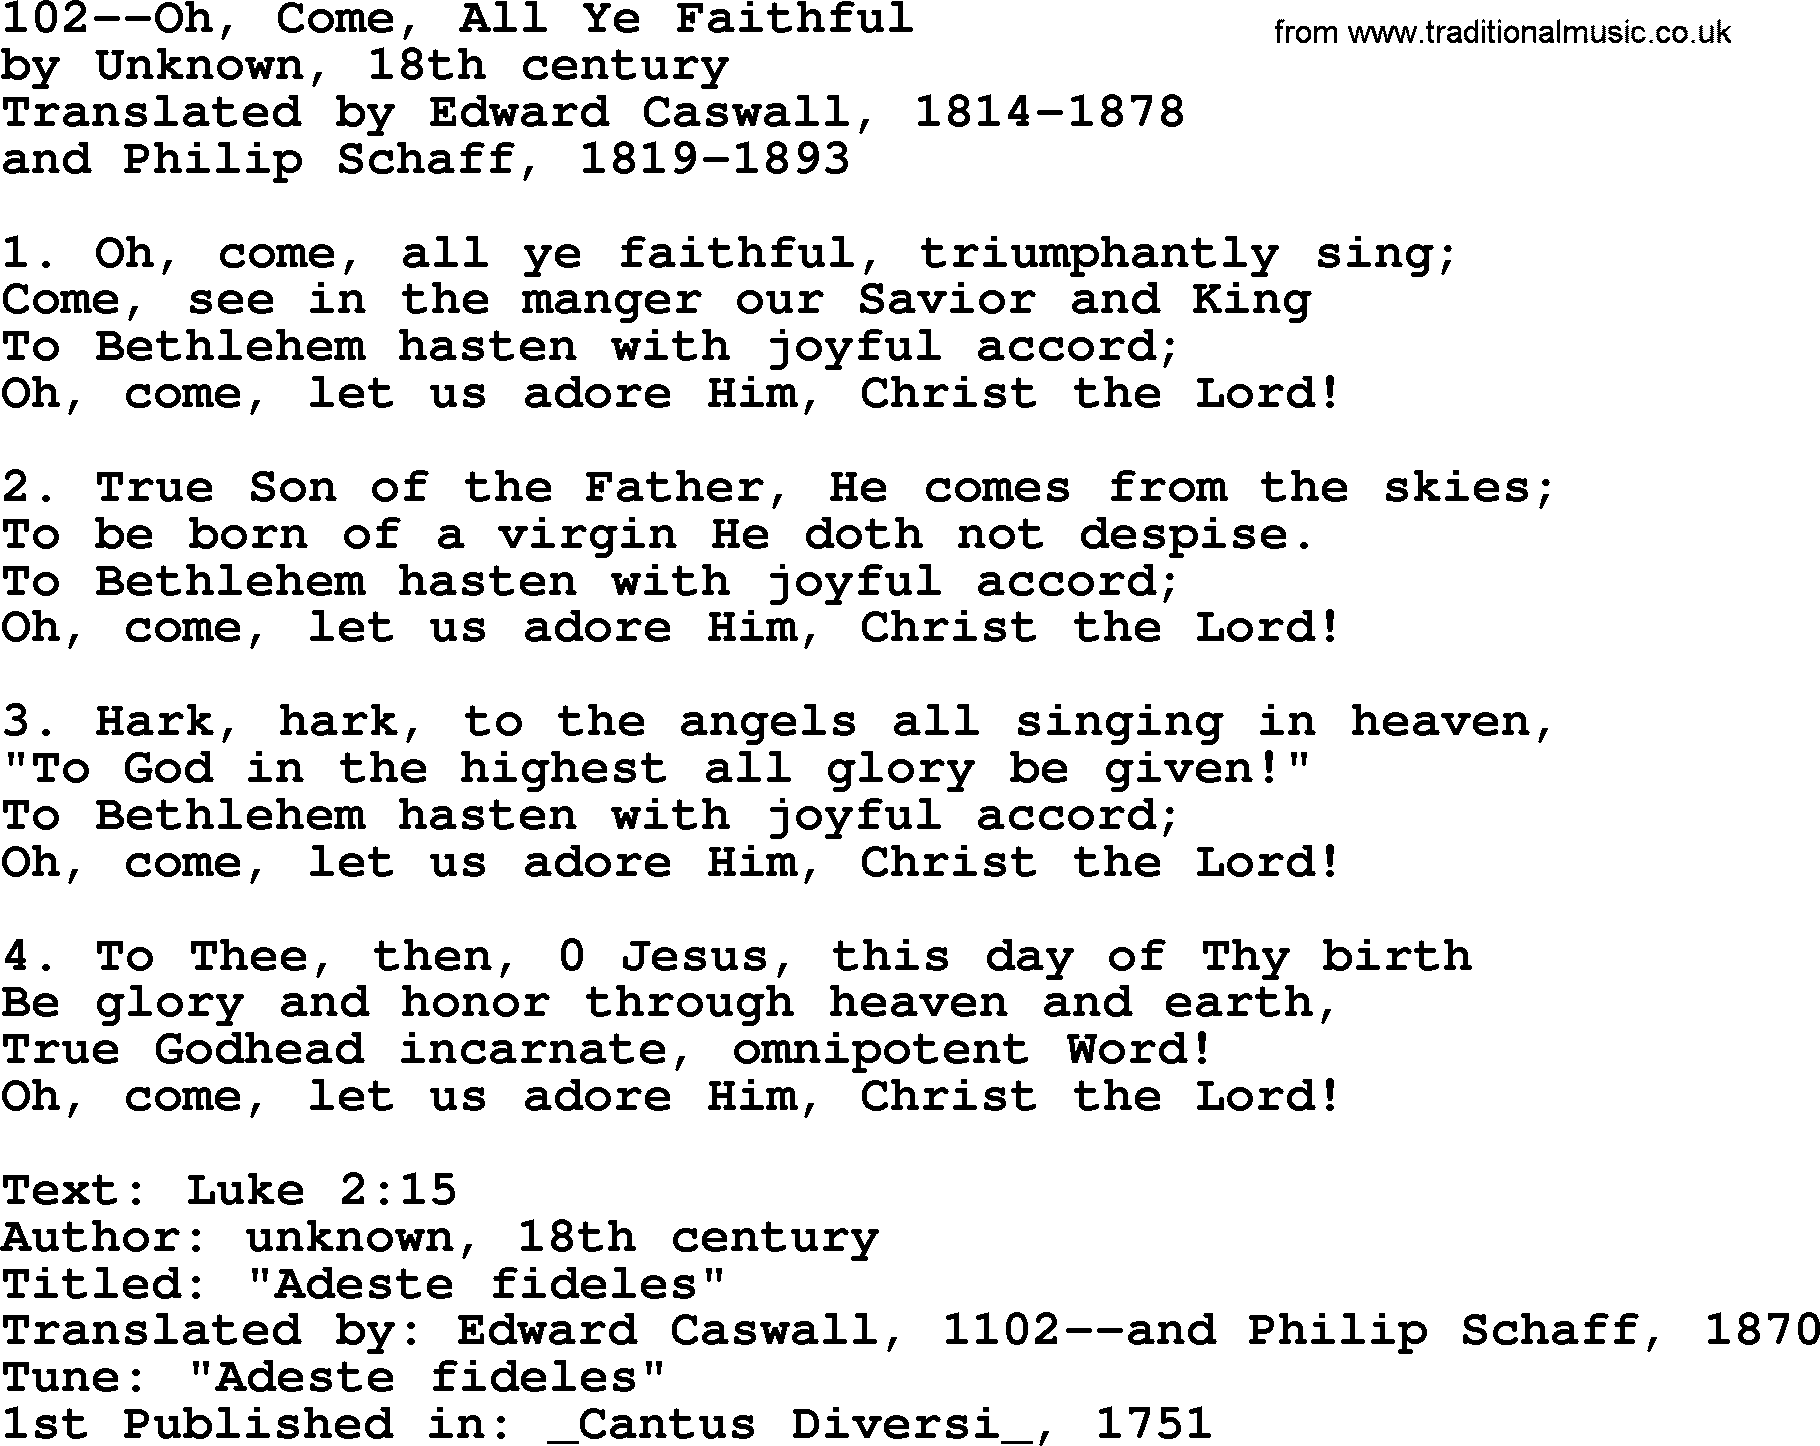 Lutheran Hymns, Song:102--Oh, Come, All Ye Faithful - lyrics and PDF